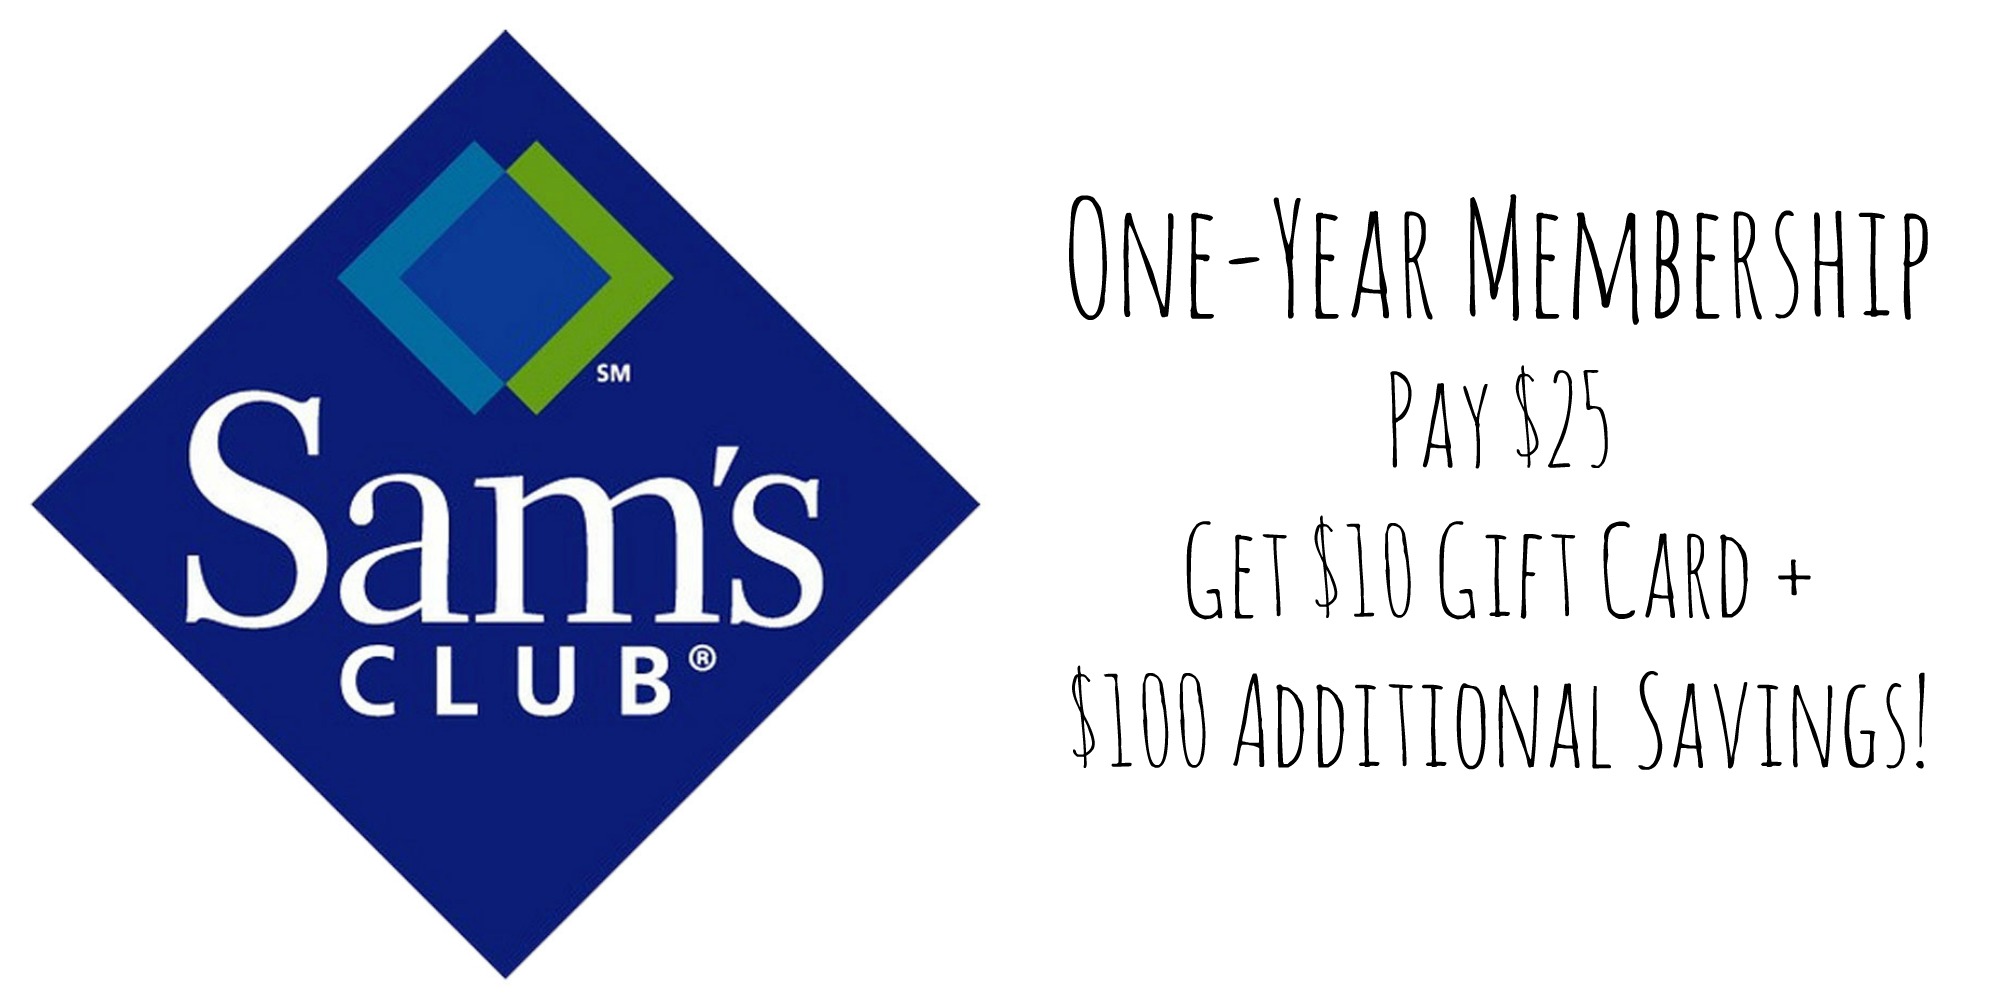 Sam's Club Membership Only 15 after Gift Card + 100 Additional